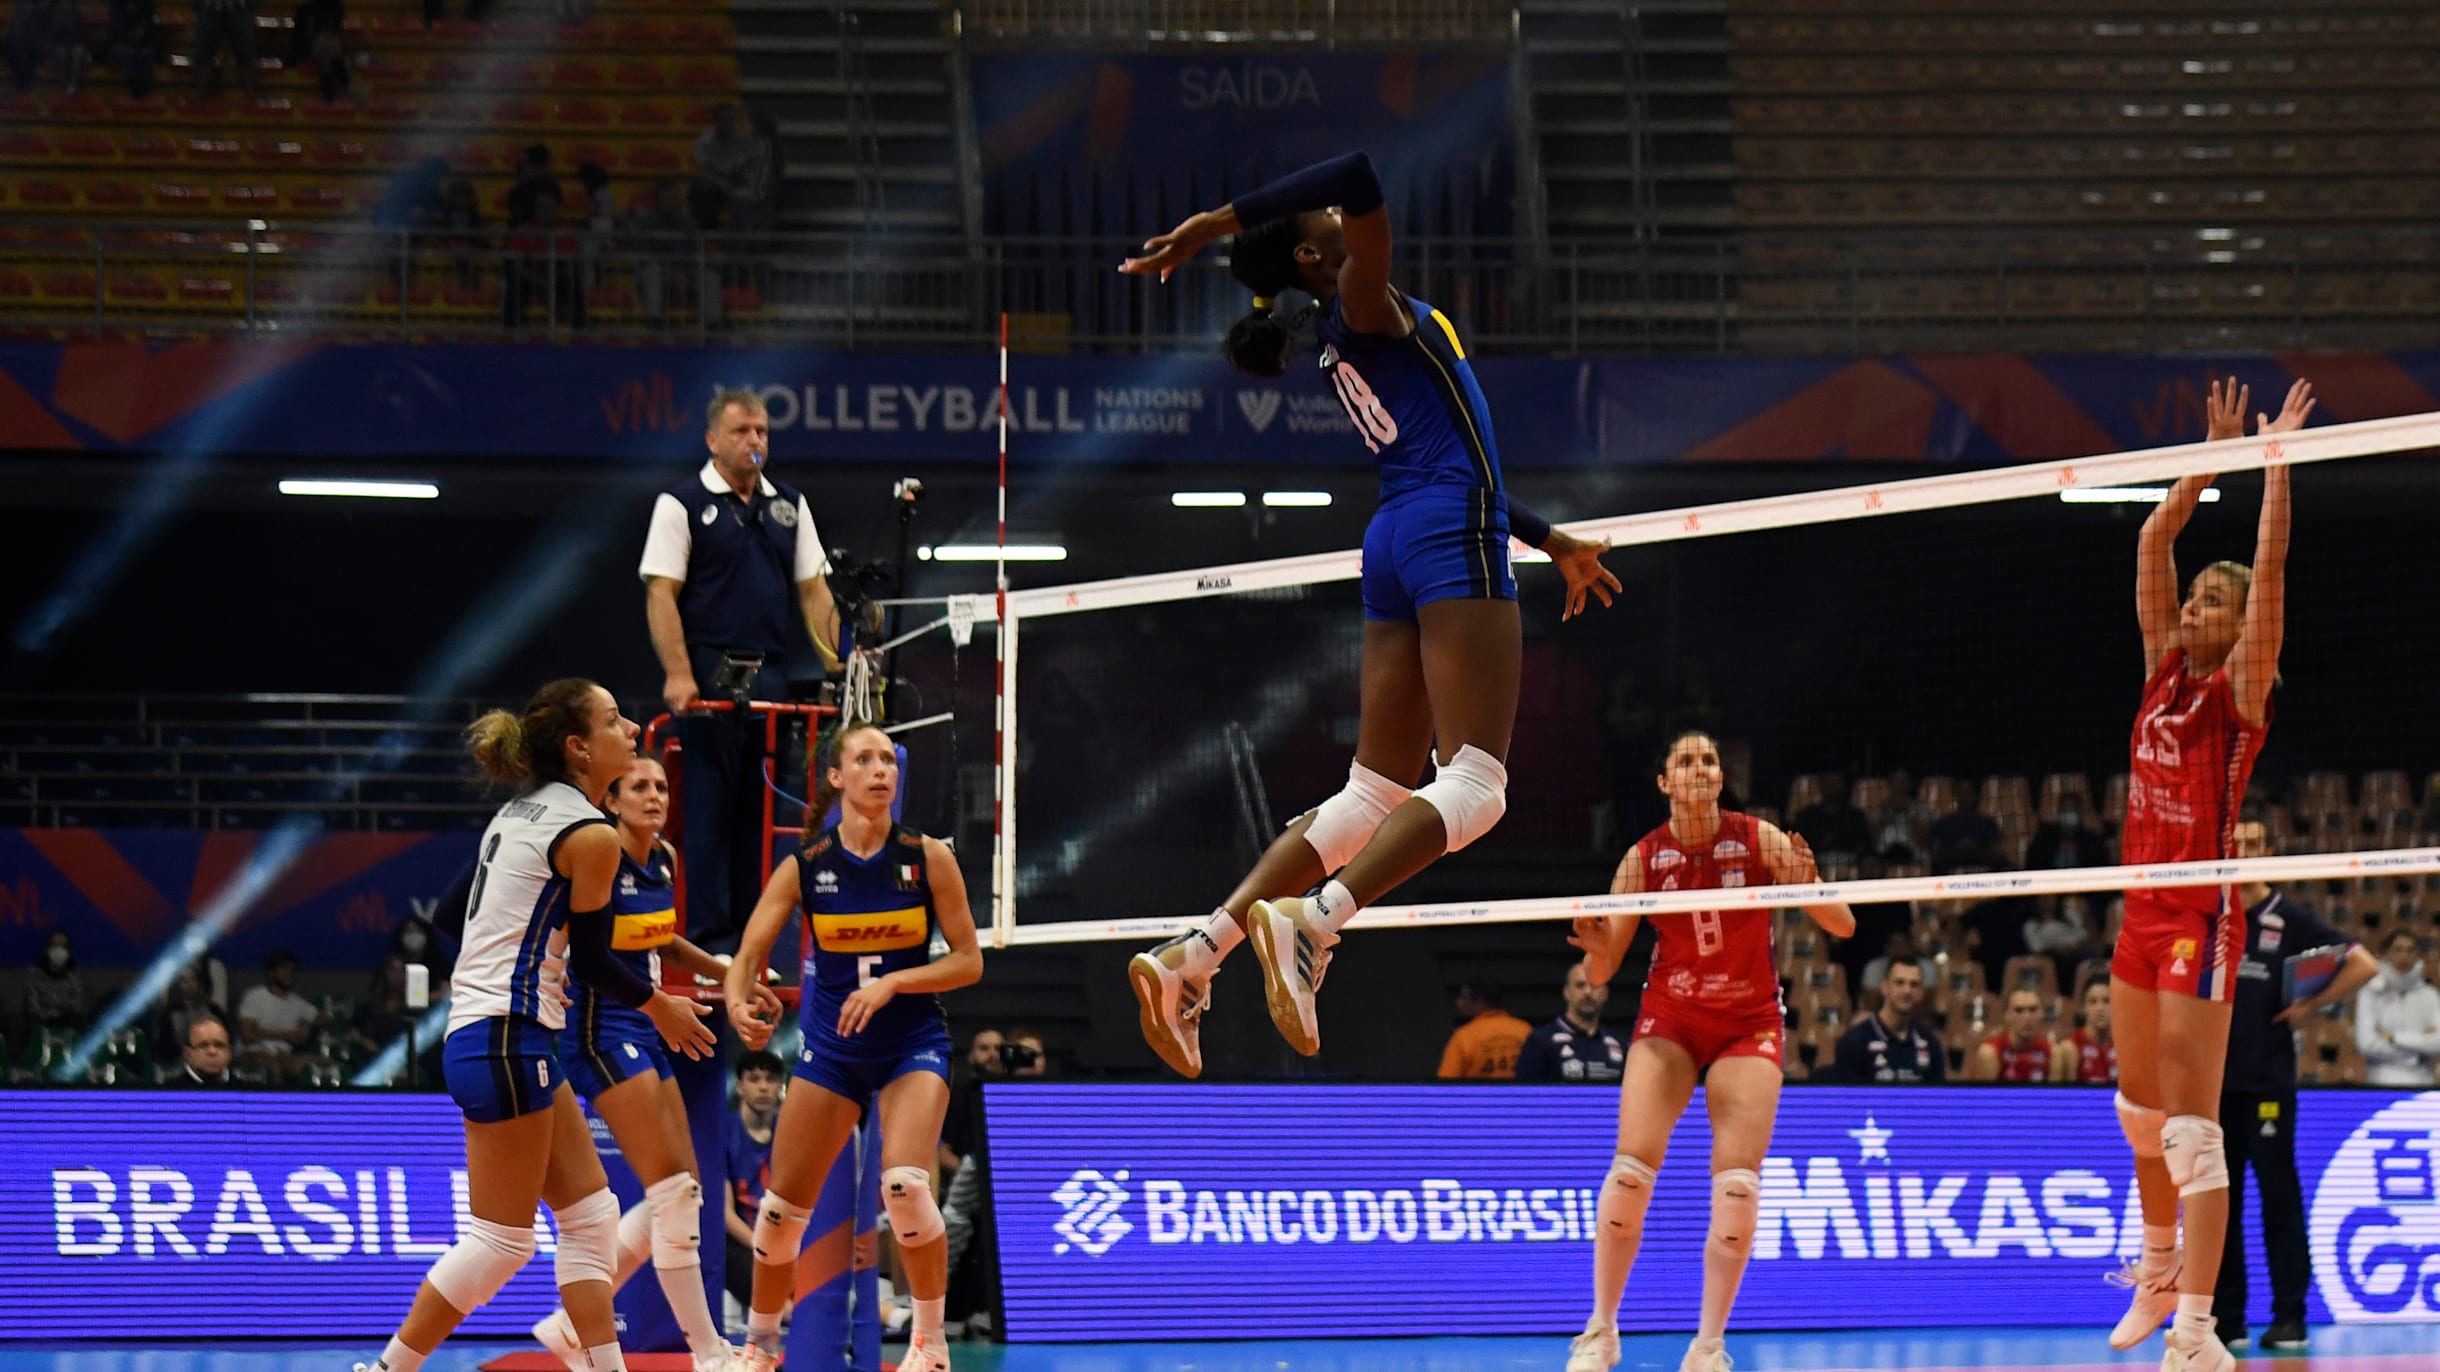 live streaming volleyball nations league